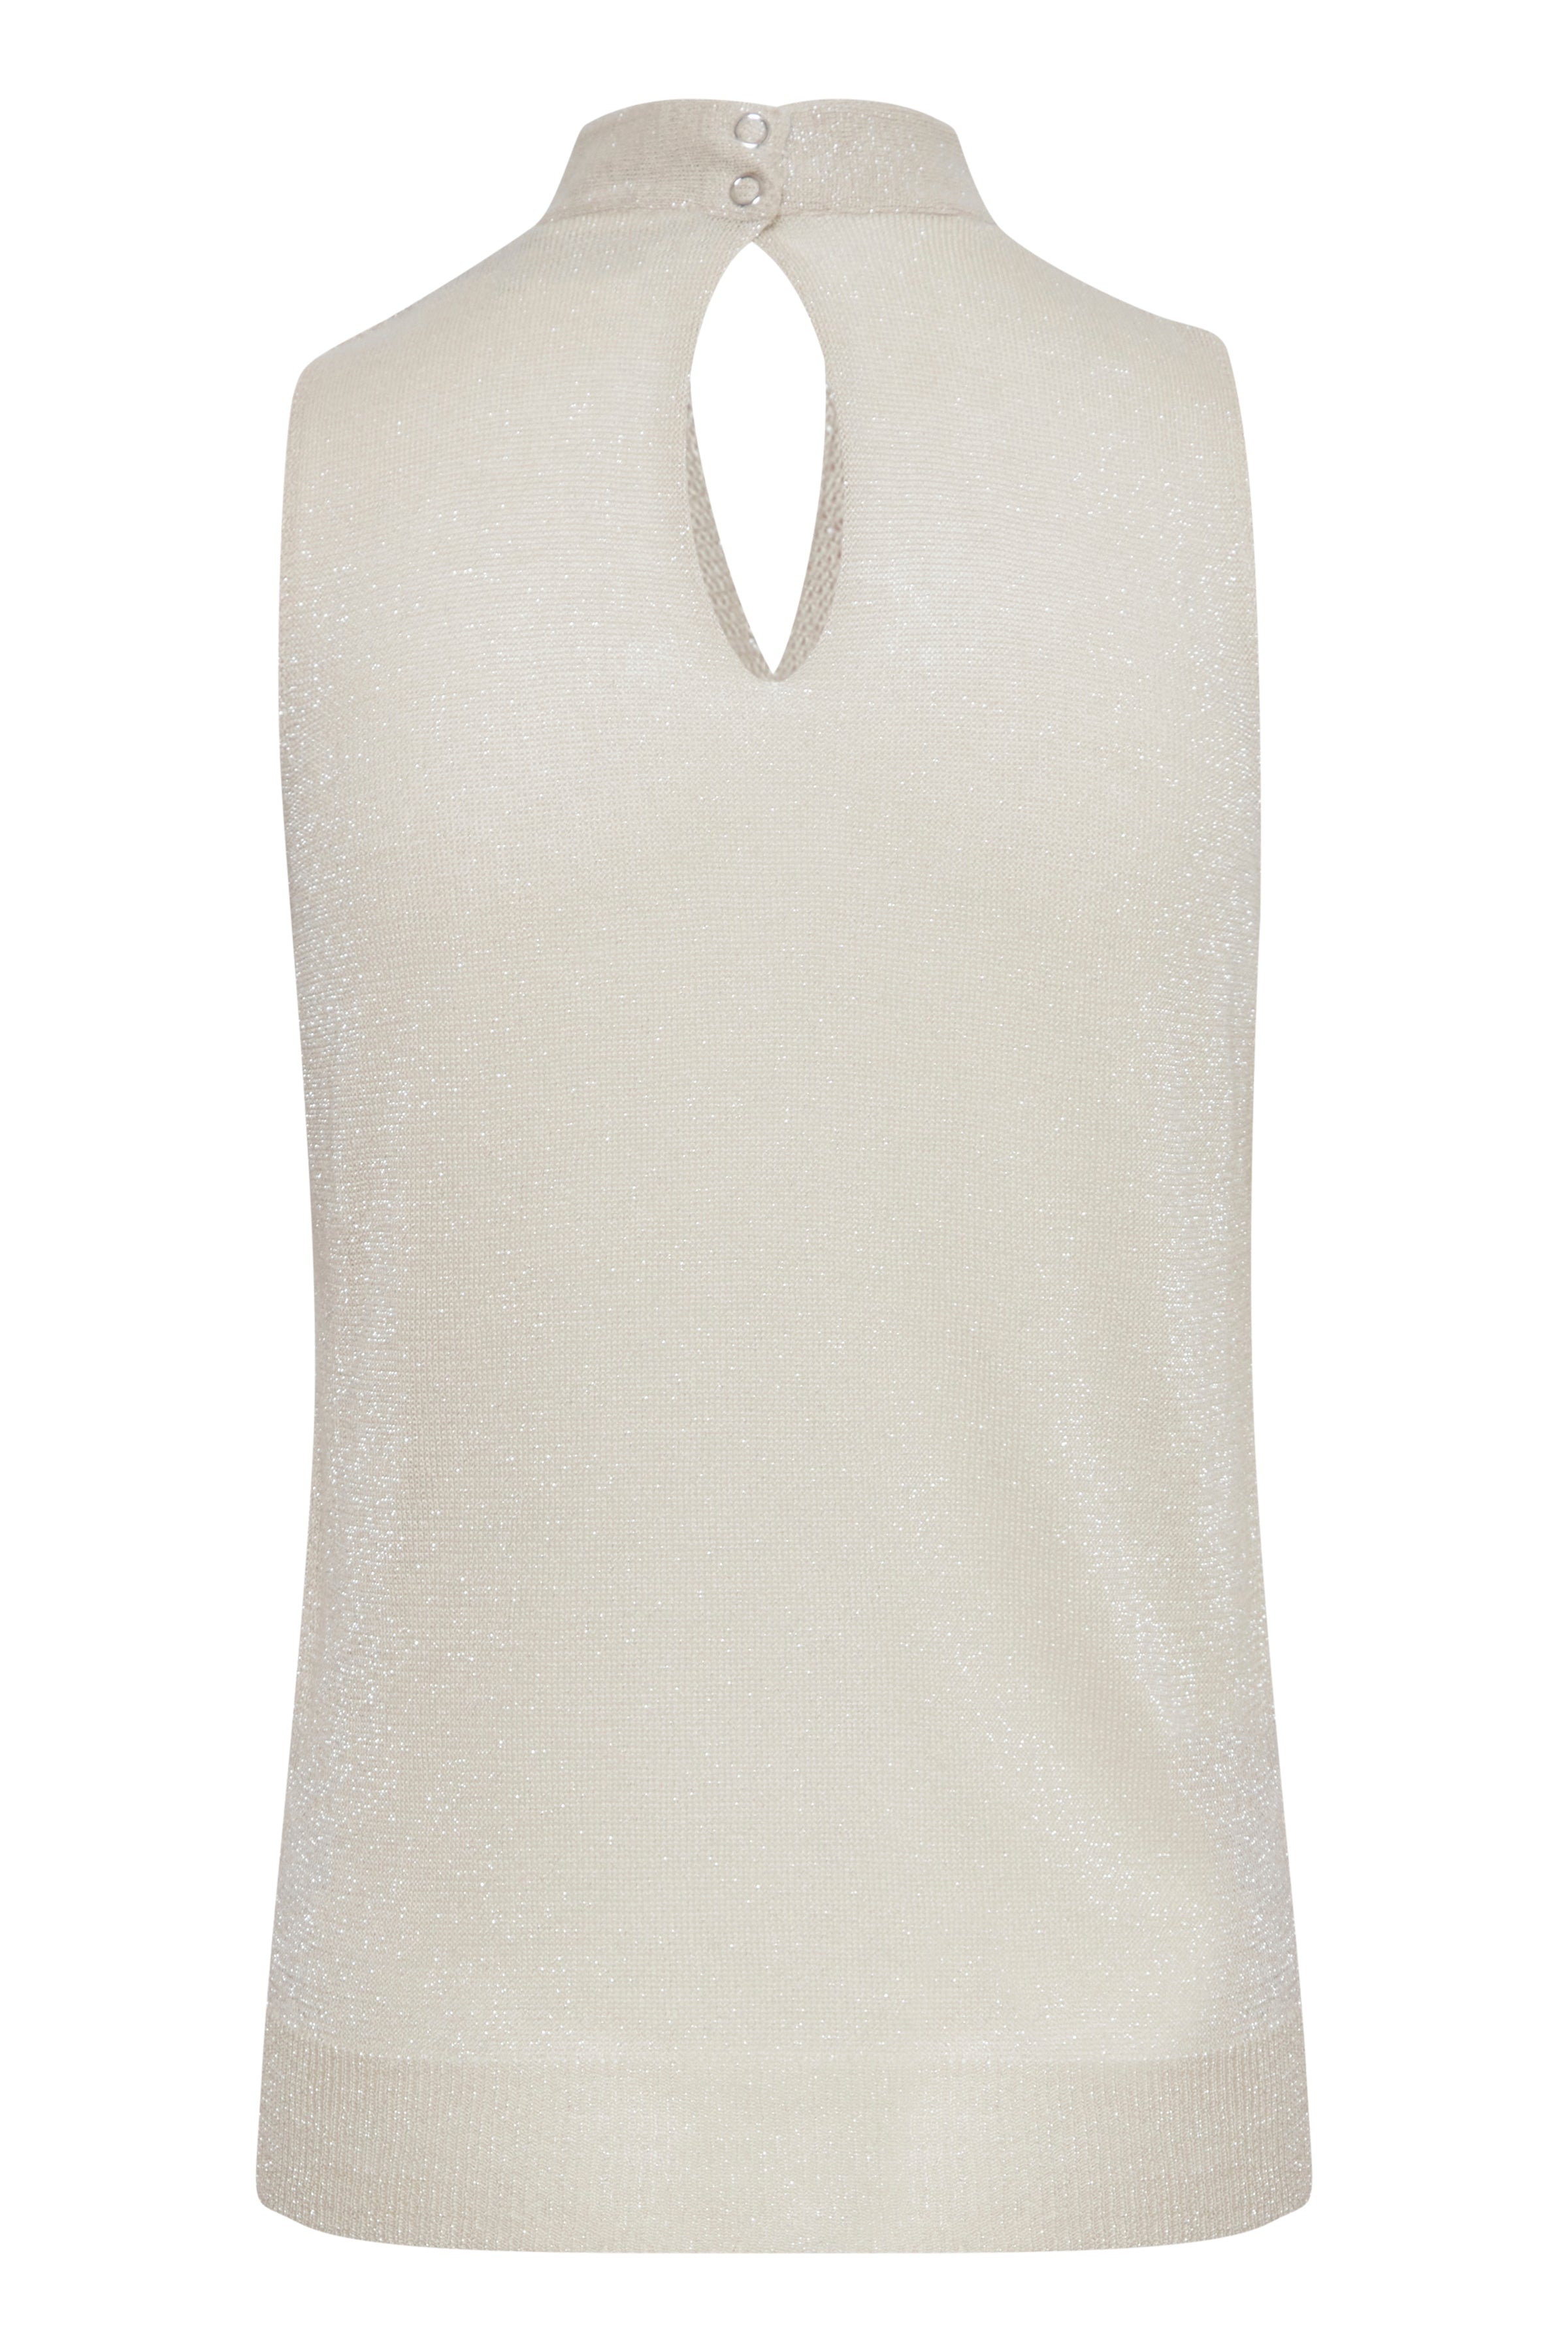 Currie Top in Sandshell